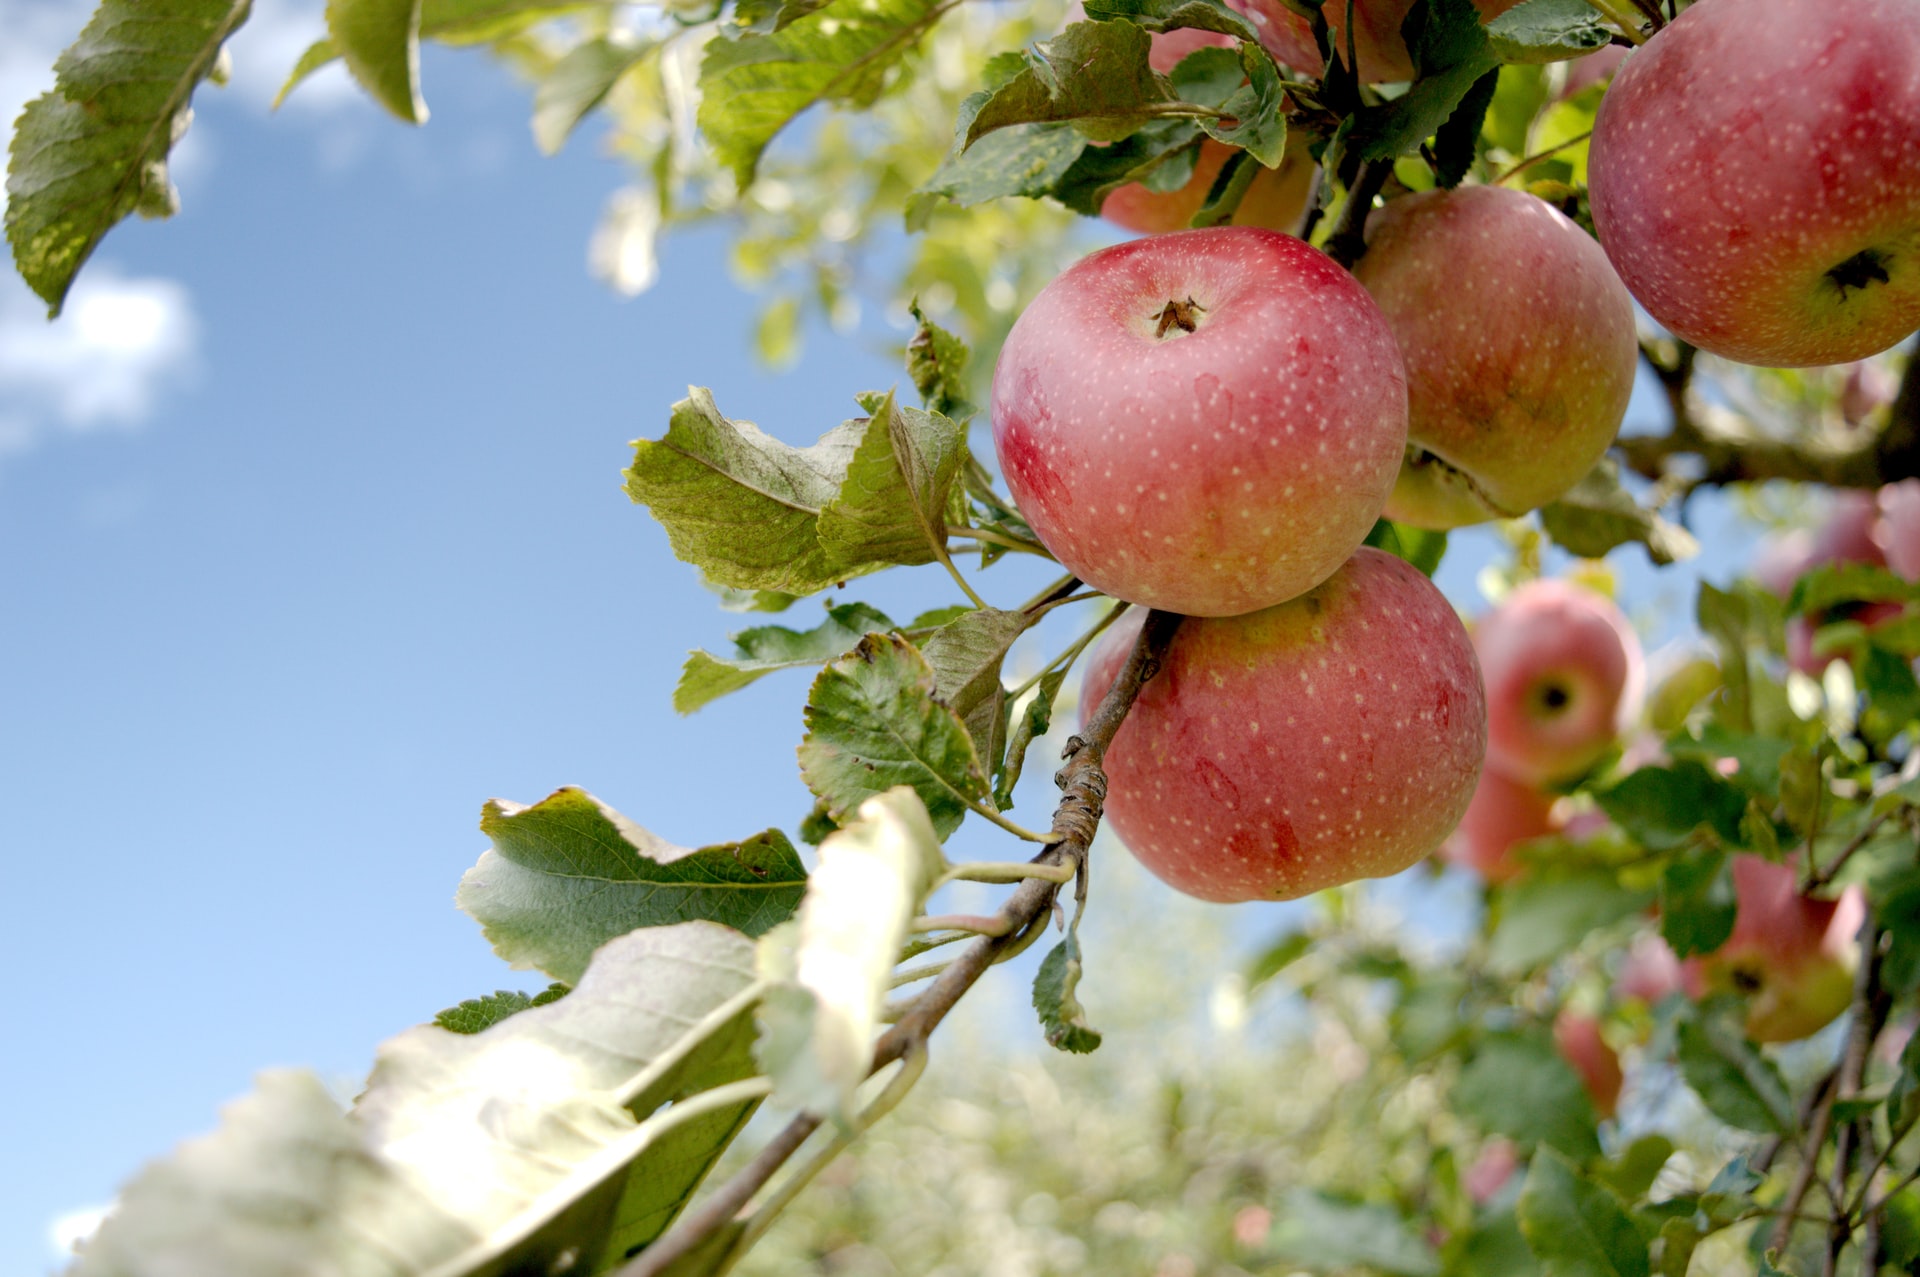 KNIME & Python Join Forces to Find Healthy Apples